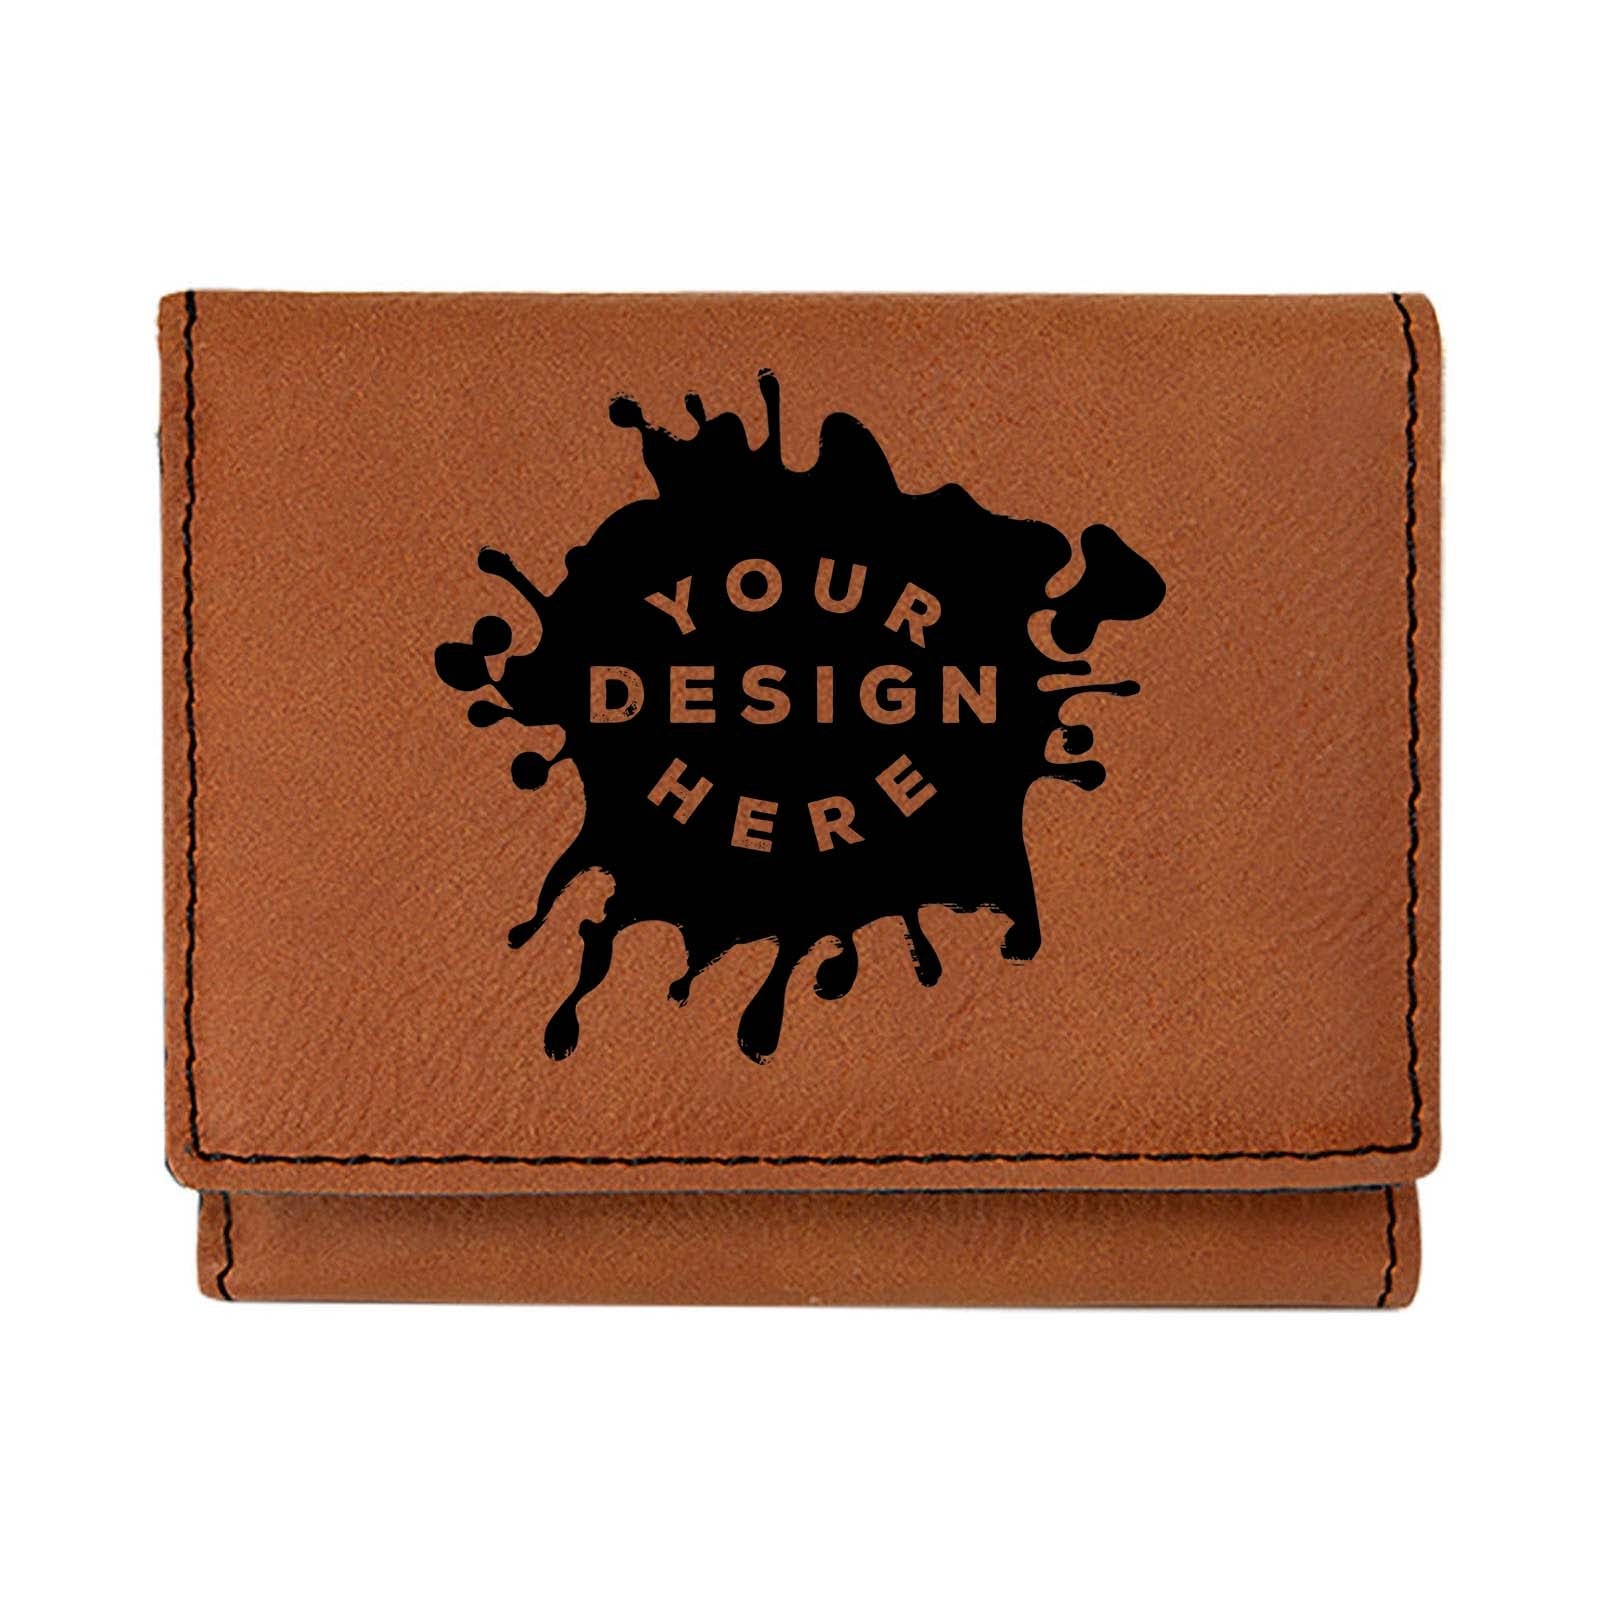 Novelty Kid's Personalized Black Leather Trifold Wallet 